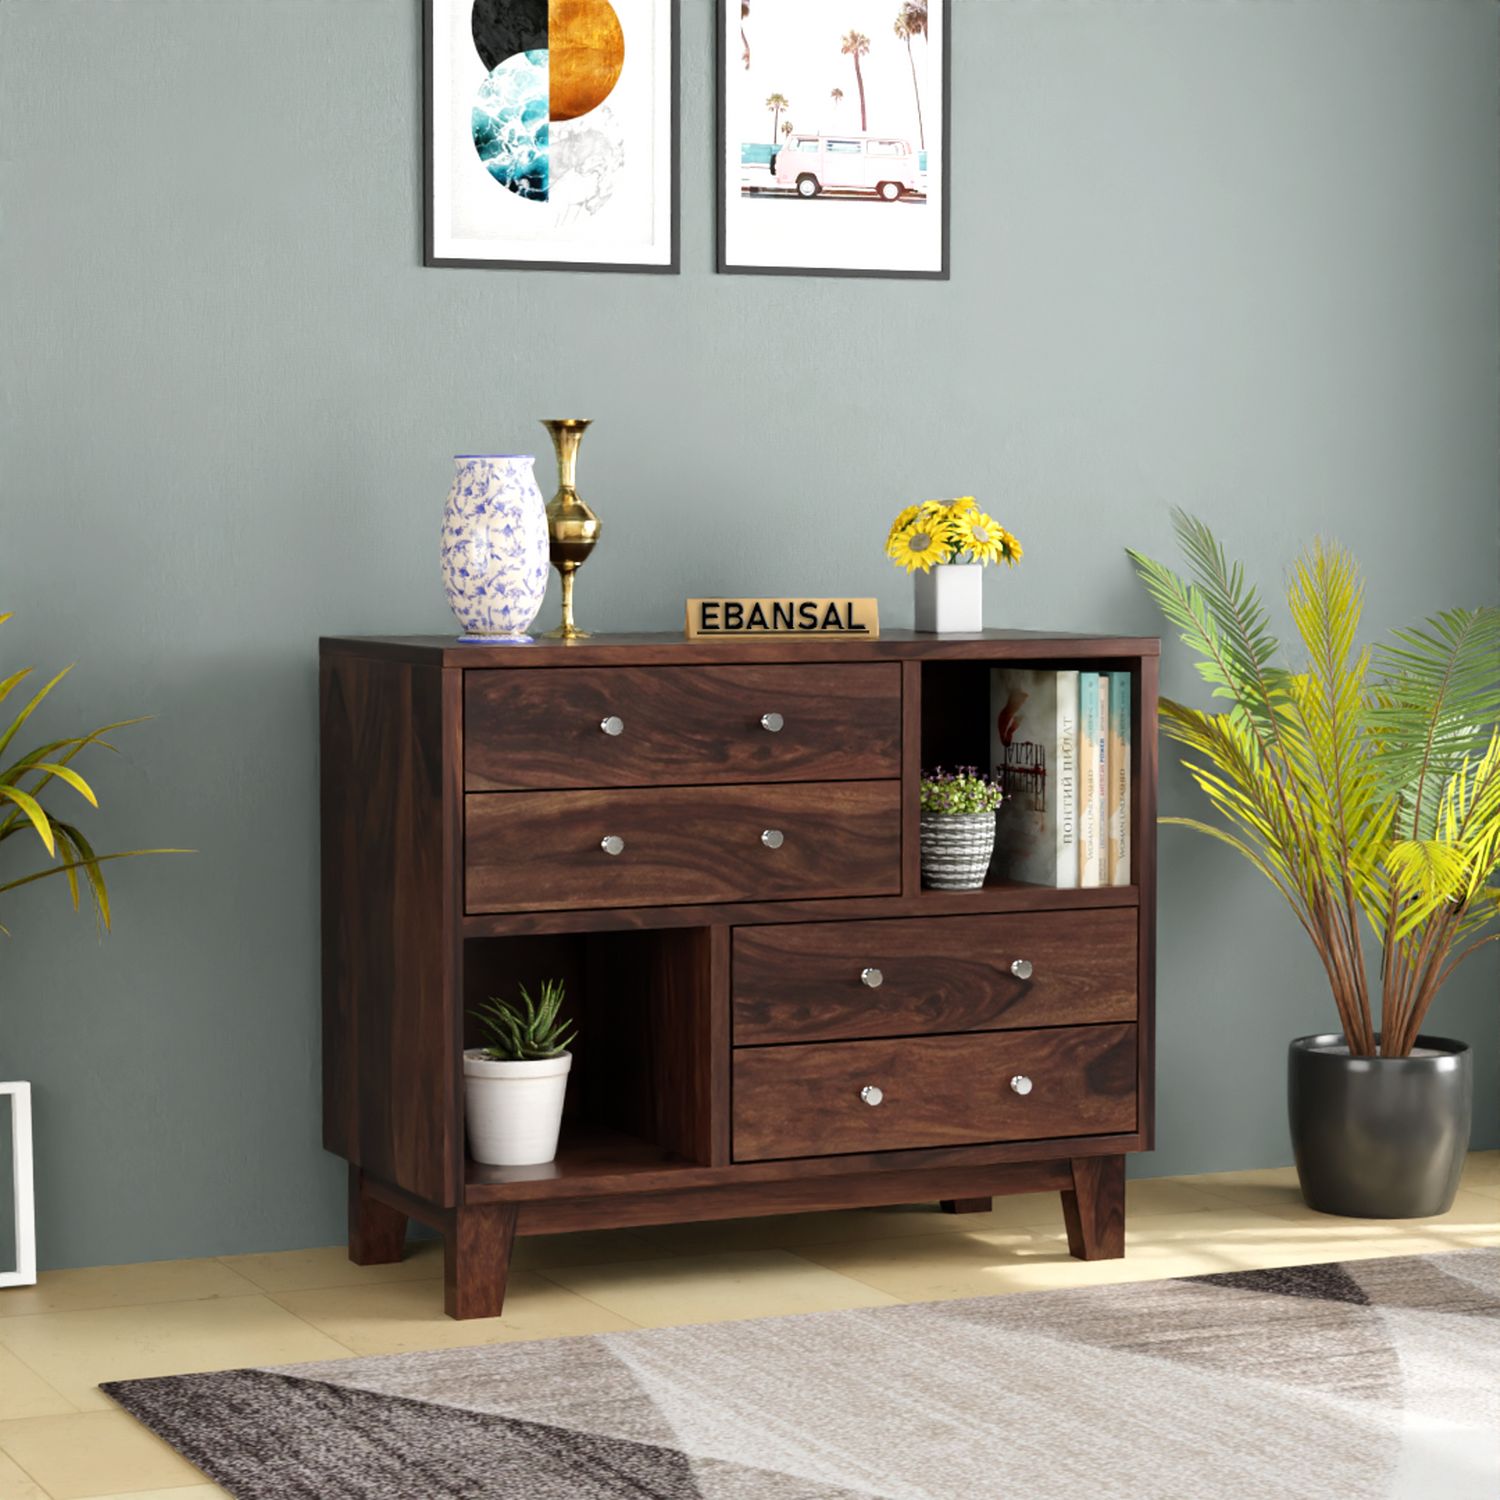 Befree Solid Sheesham Wood Chest of Drawers With Shelves (Walnut Finish)